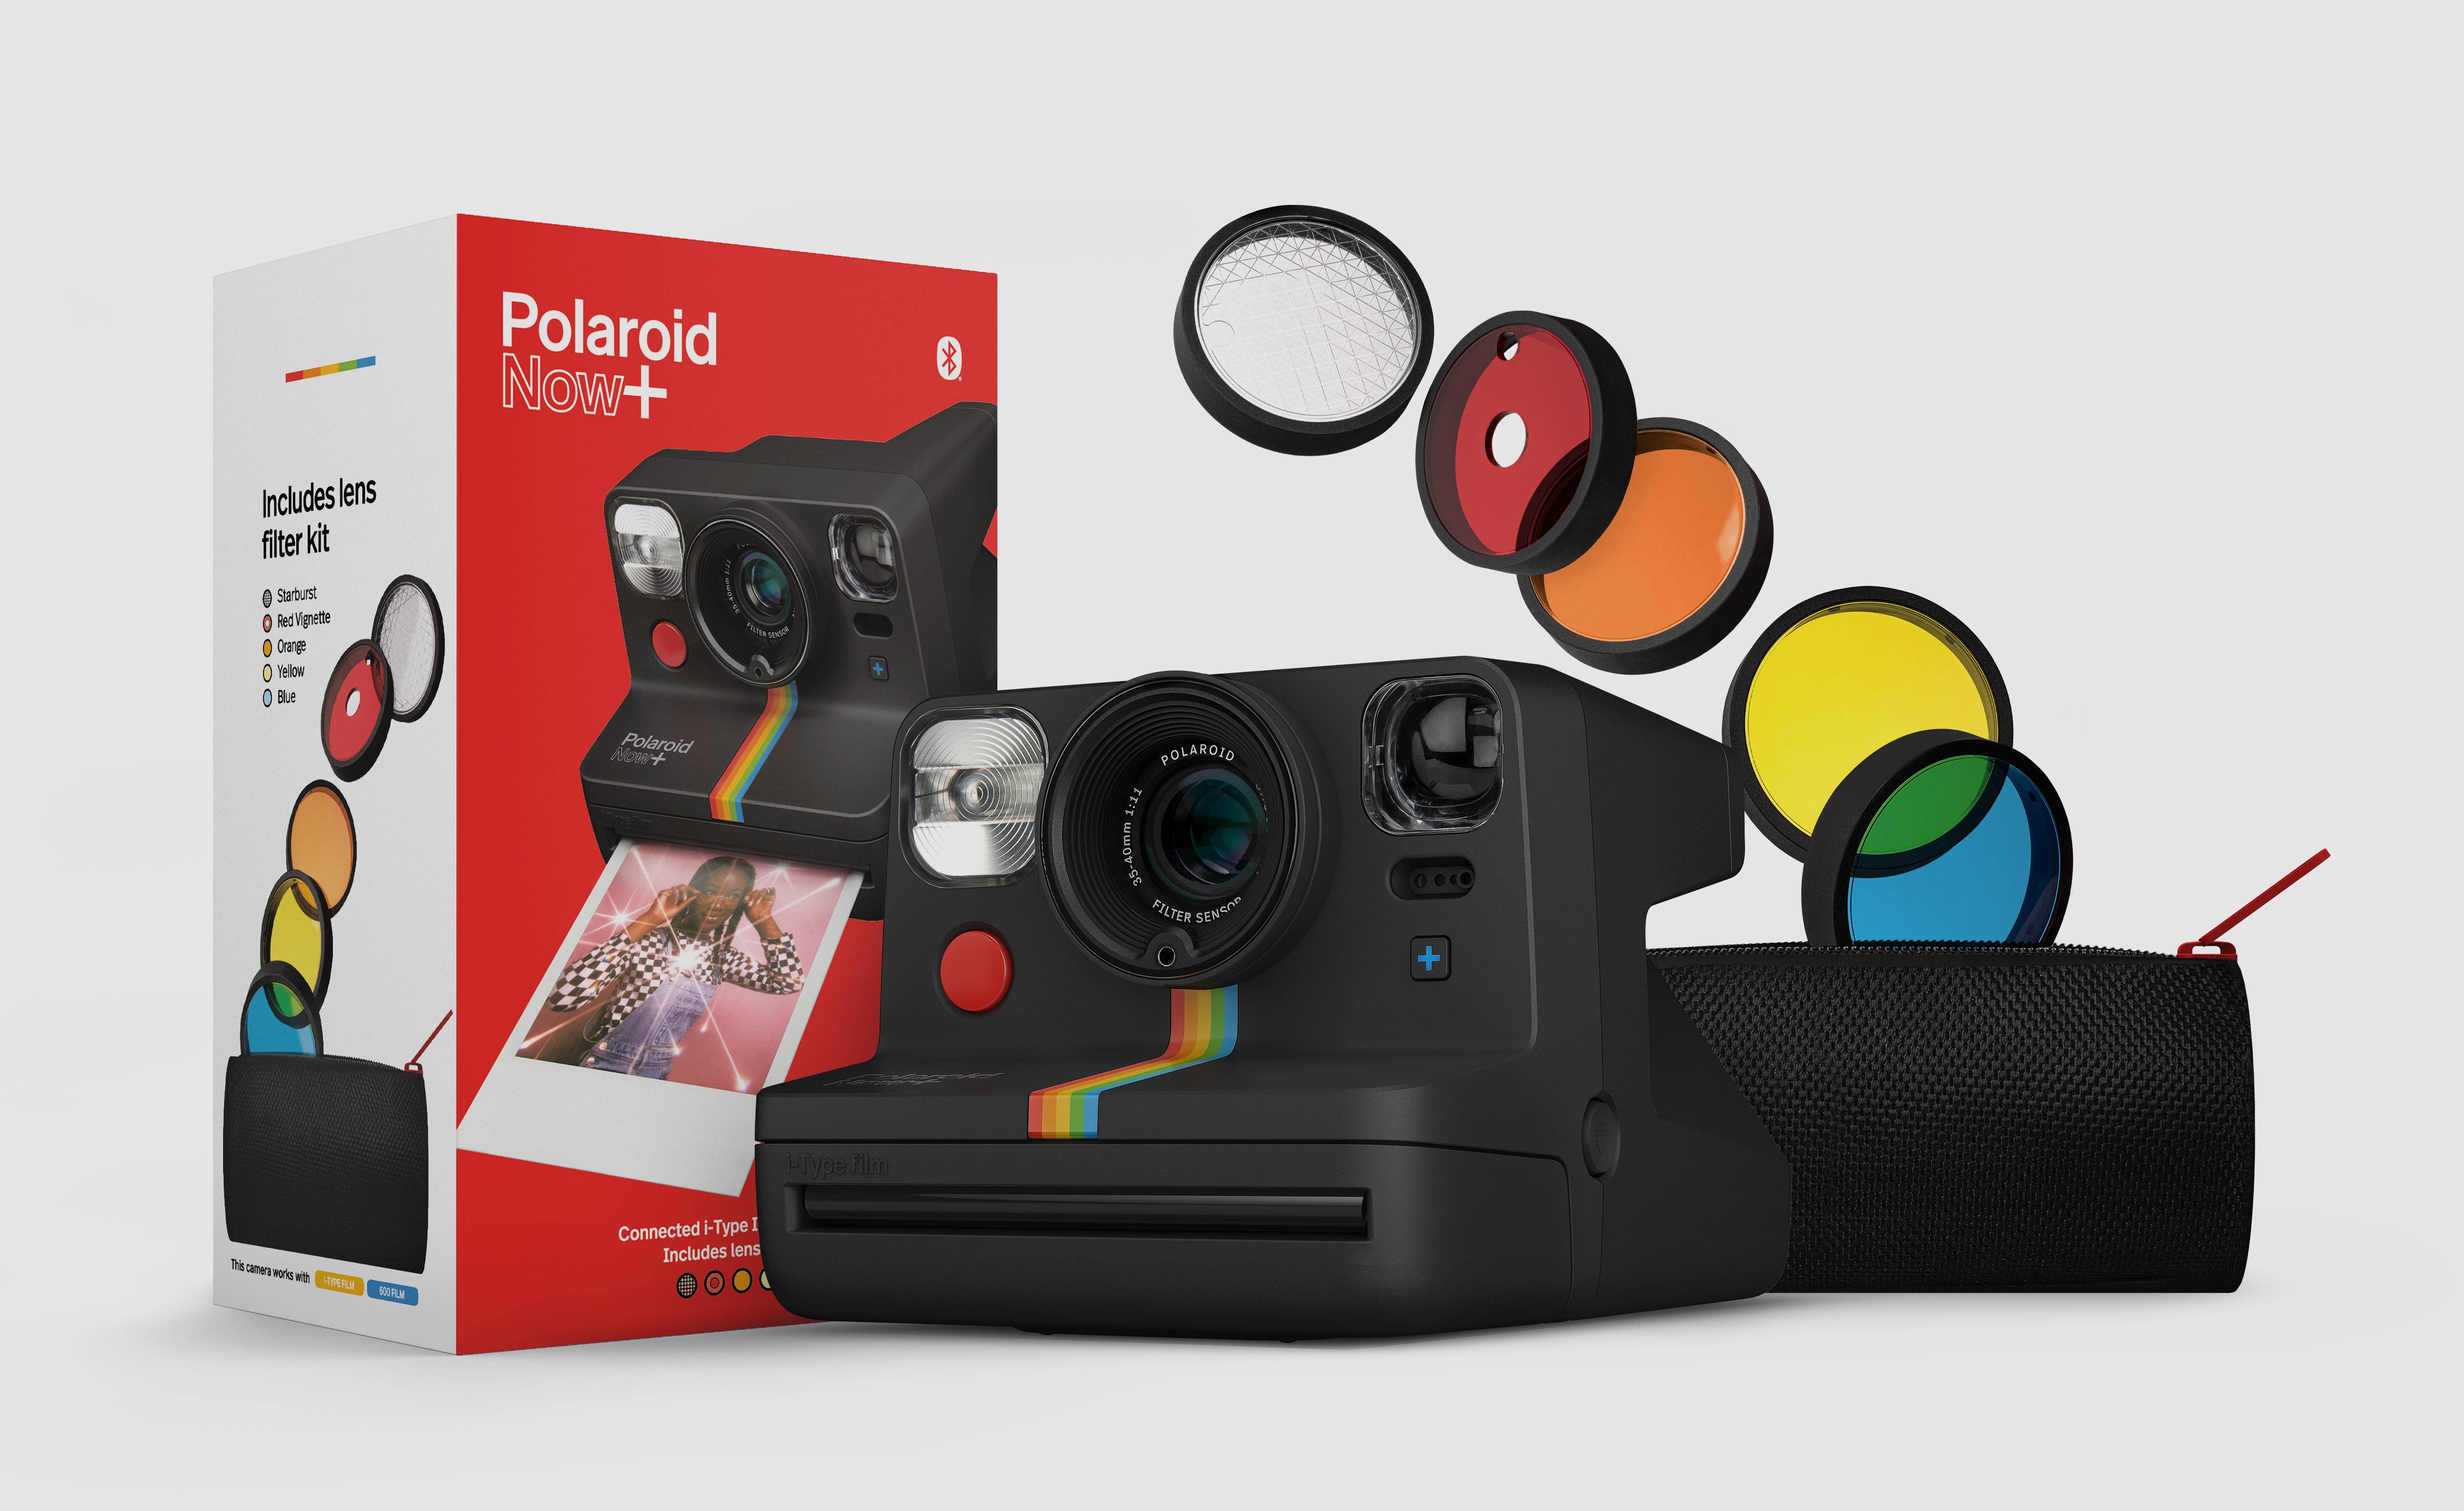 Polaroid Now+ is an instant camera targeted at fun